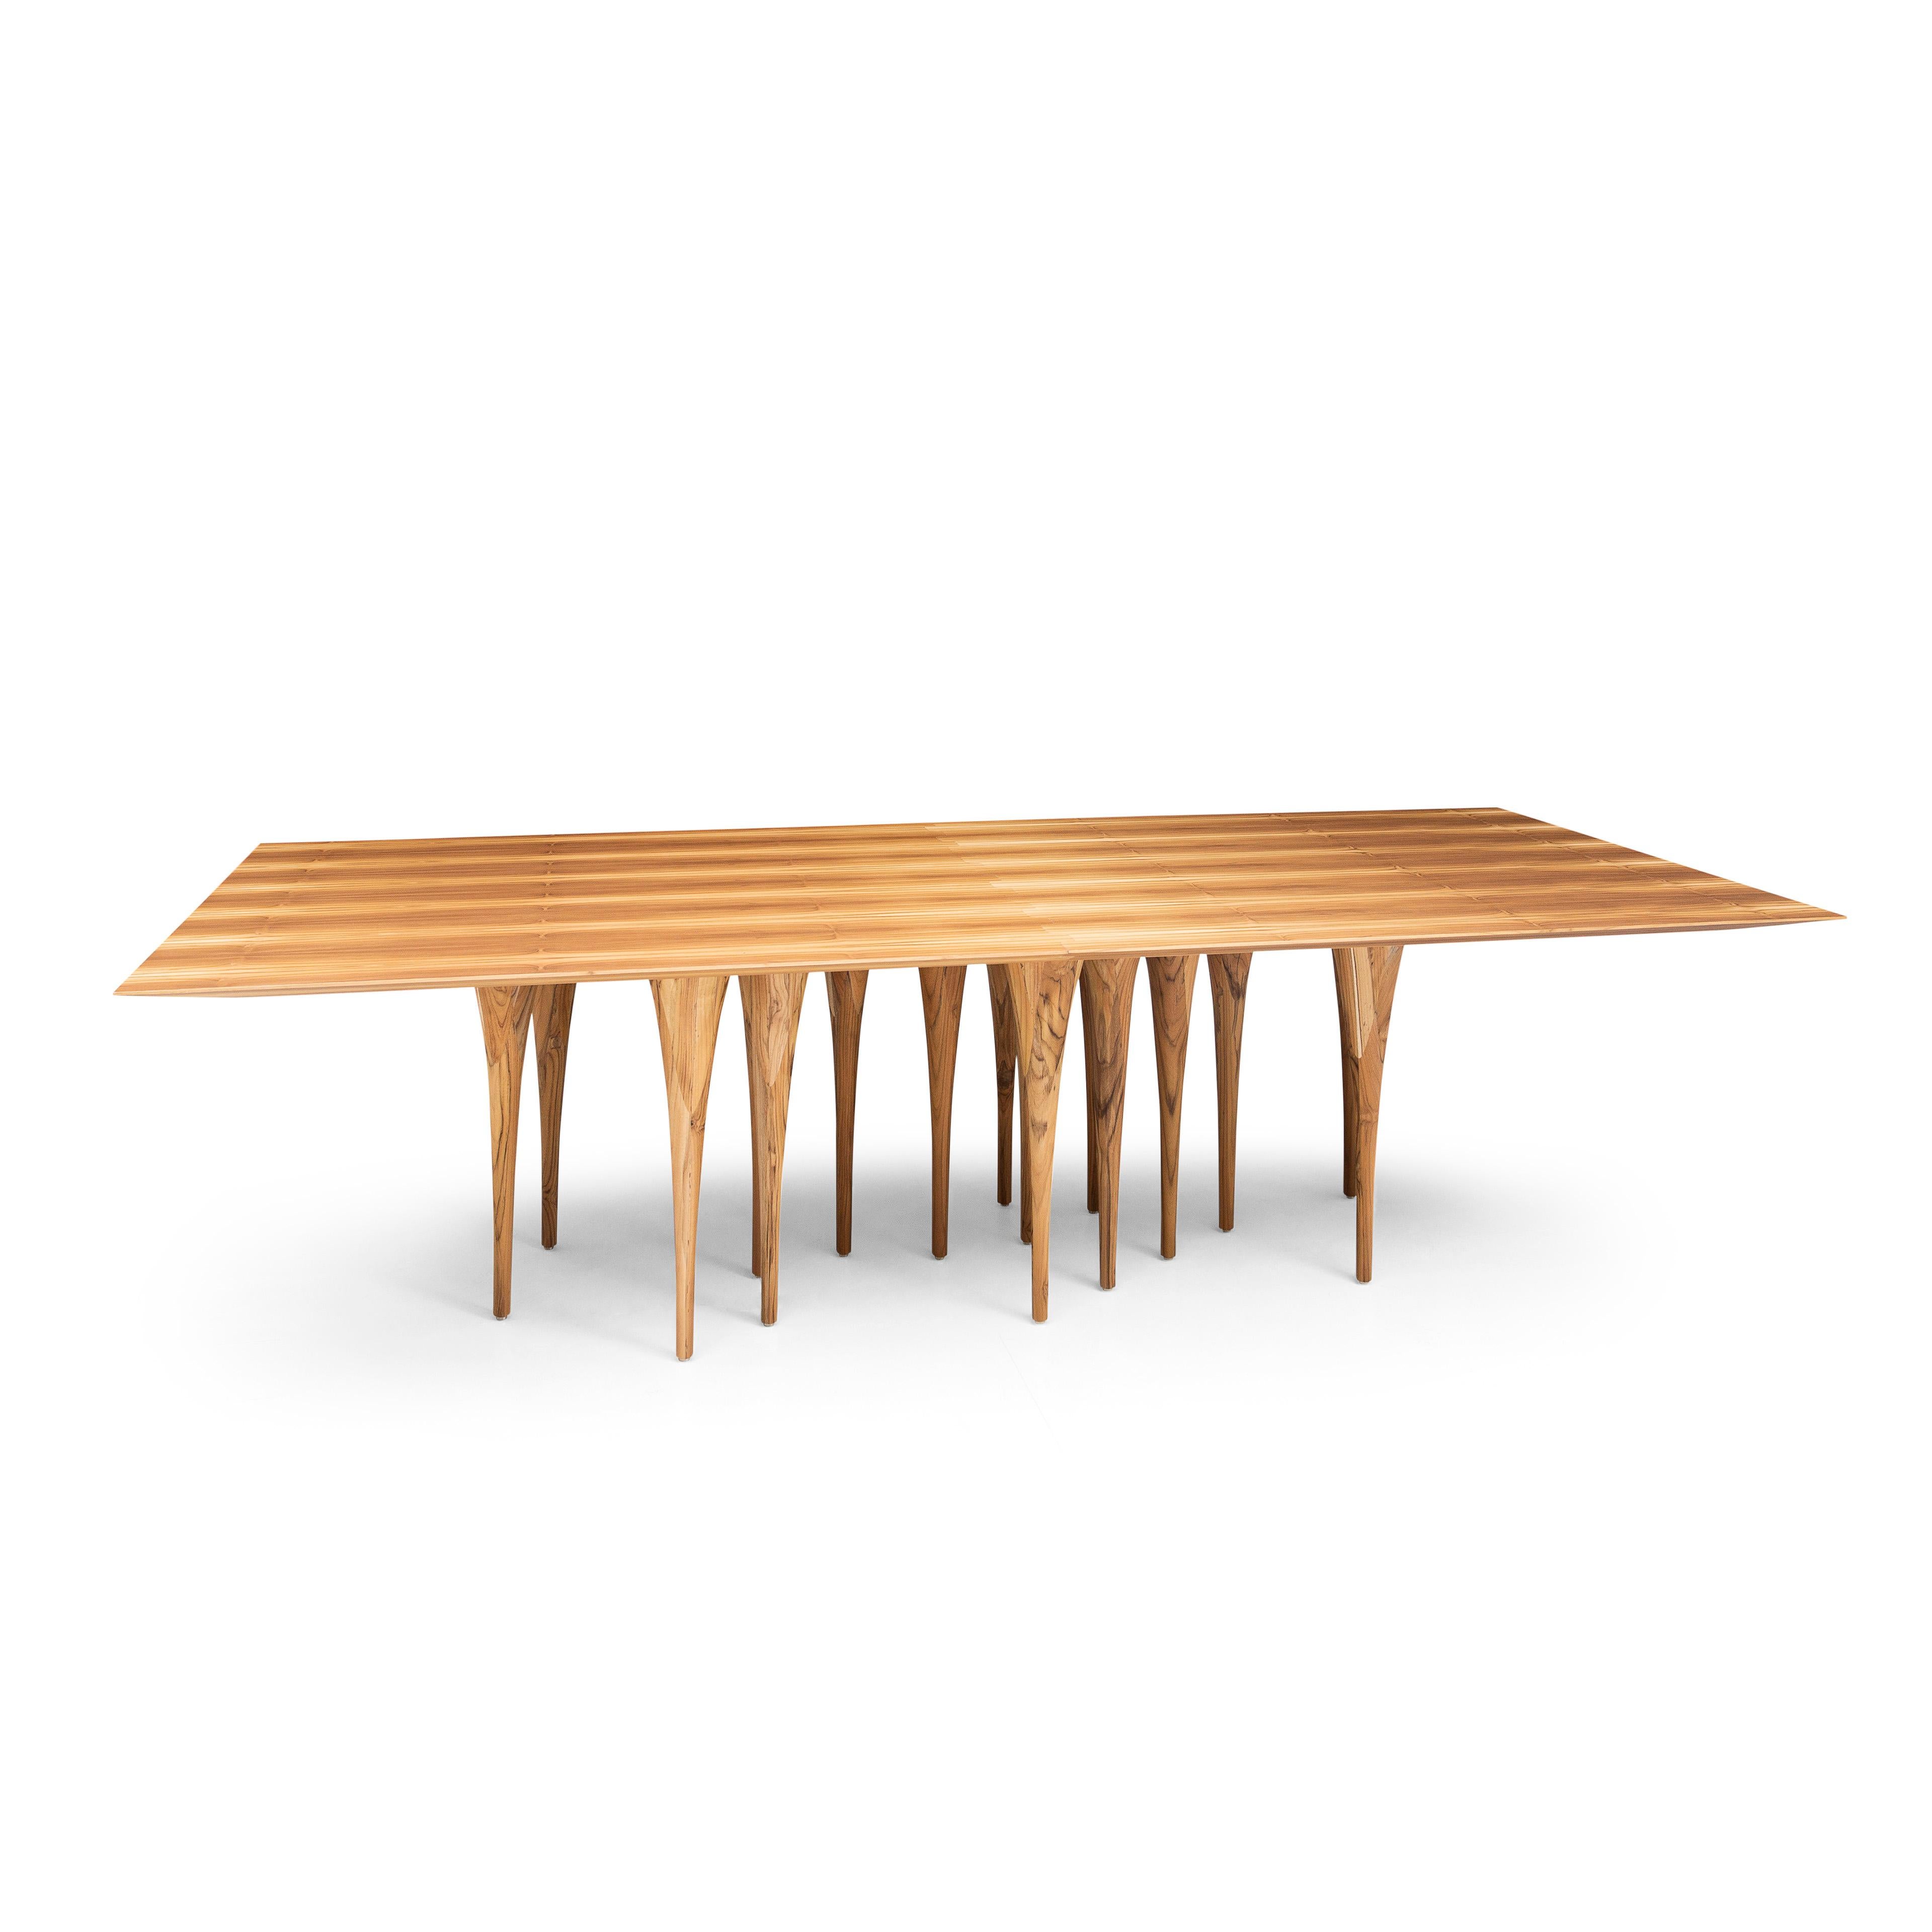 Contemporary Pin Dining Table with a Teak Wood Veneered Table Top and 12 Legs 98'' For Sale